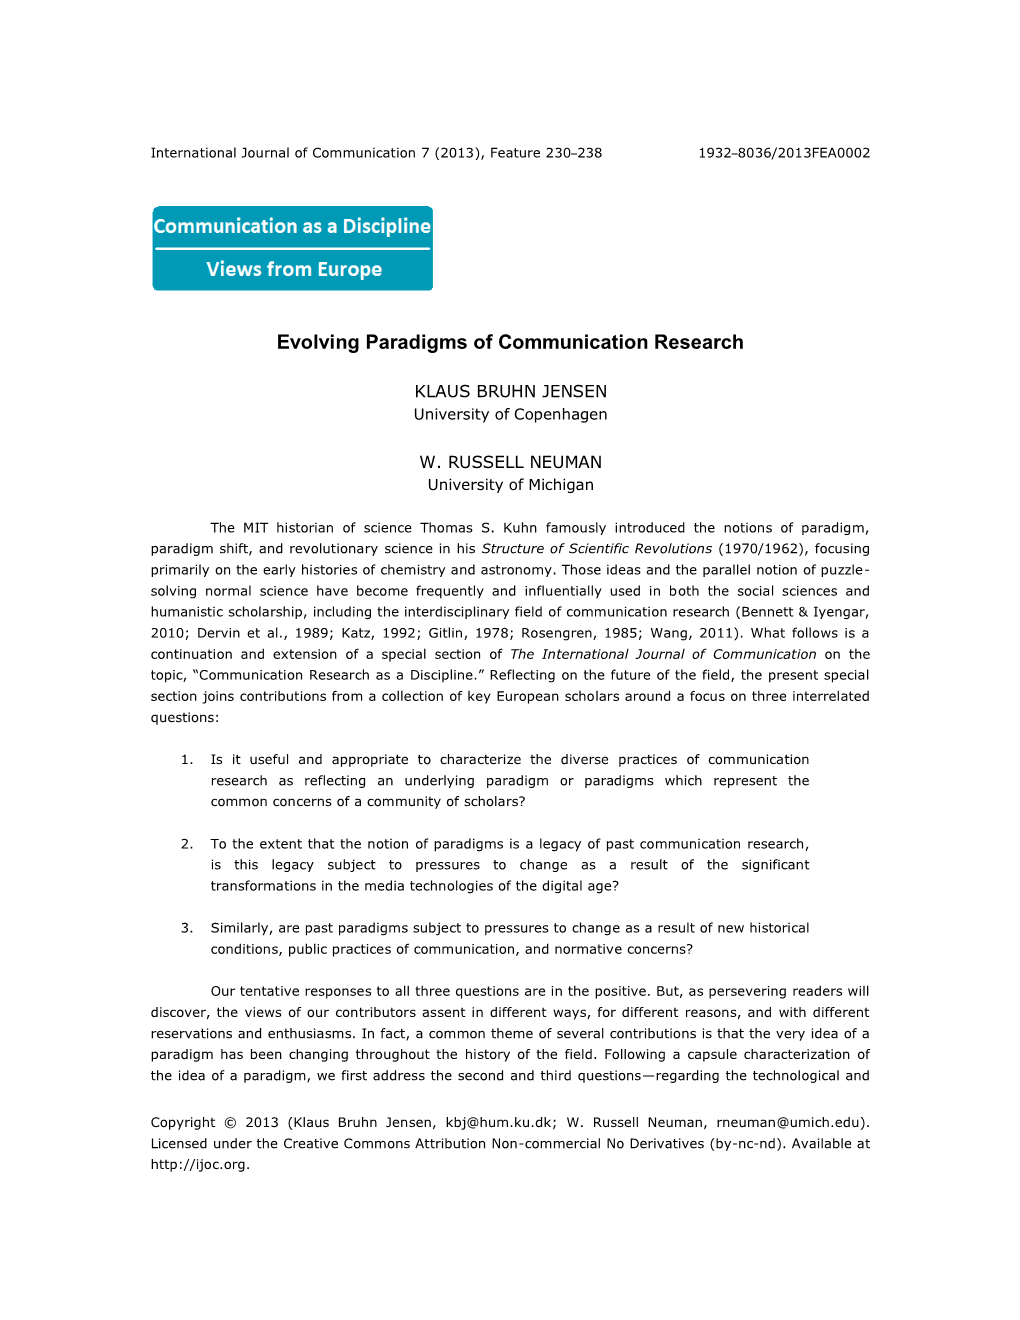 Evolving Paradigms of Communication Research